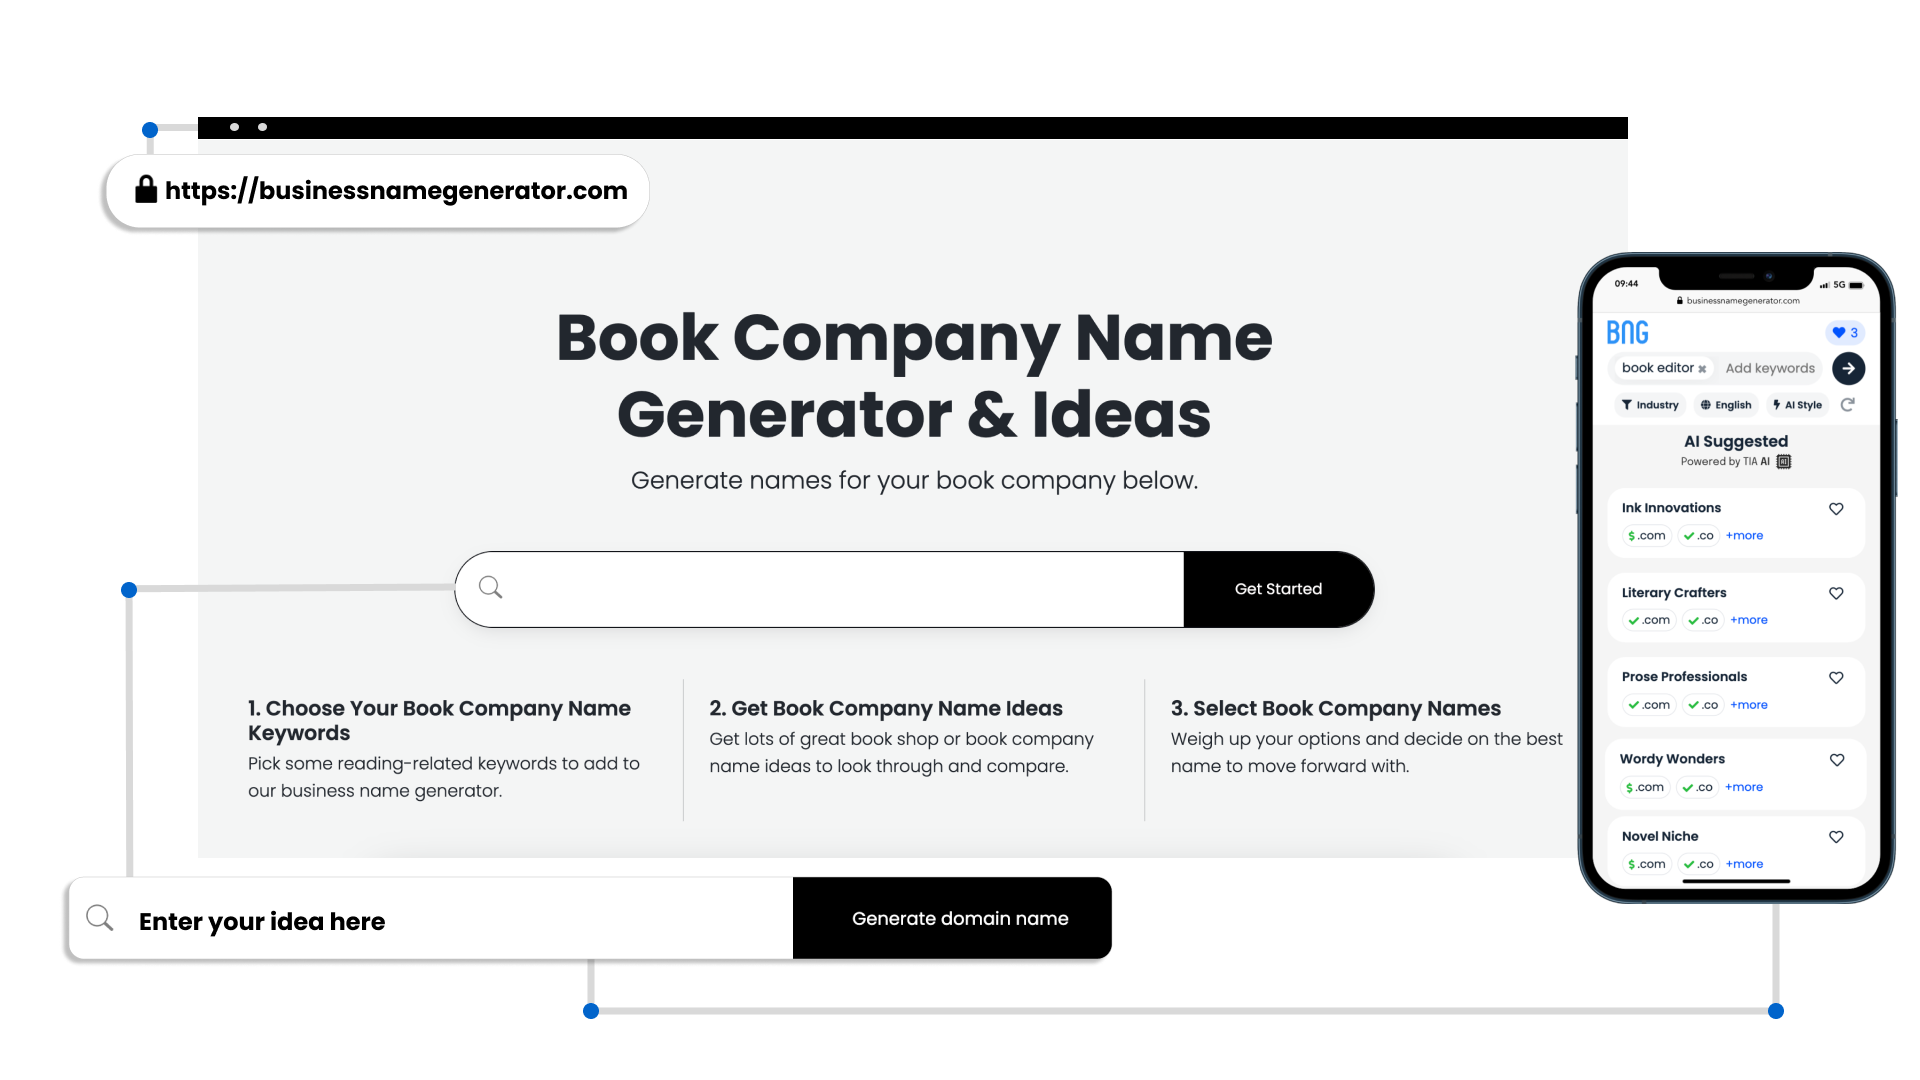 Benefits of Our Book Company Name Generator
